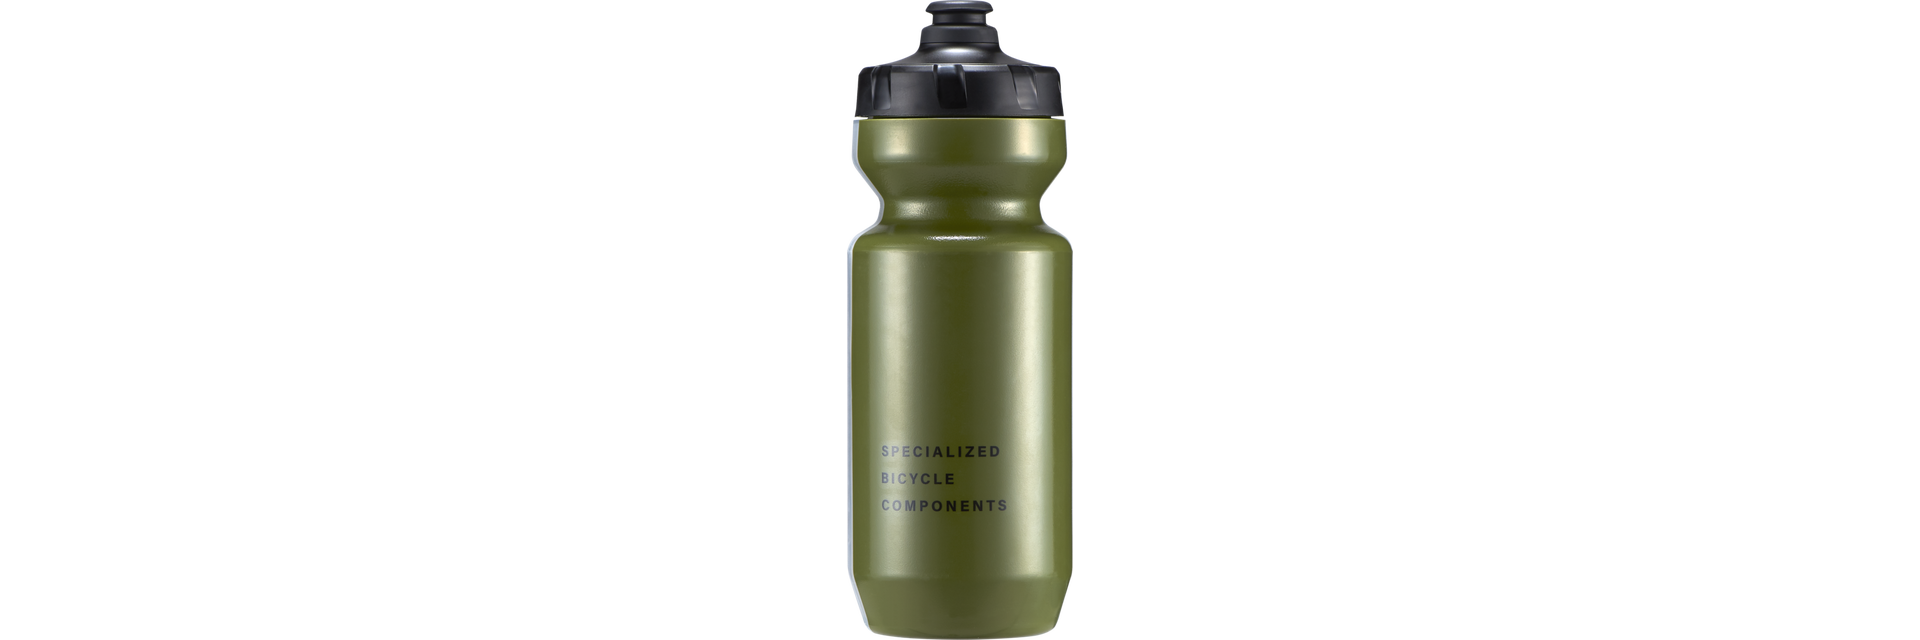 Specialized Special Eyes Purist Moflo Water Bottle 22oz Sbc moss